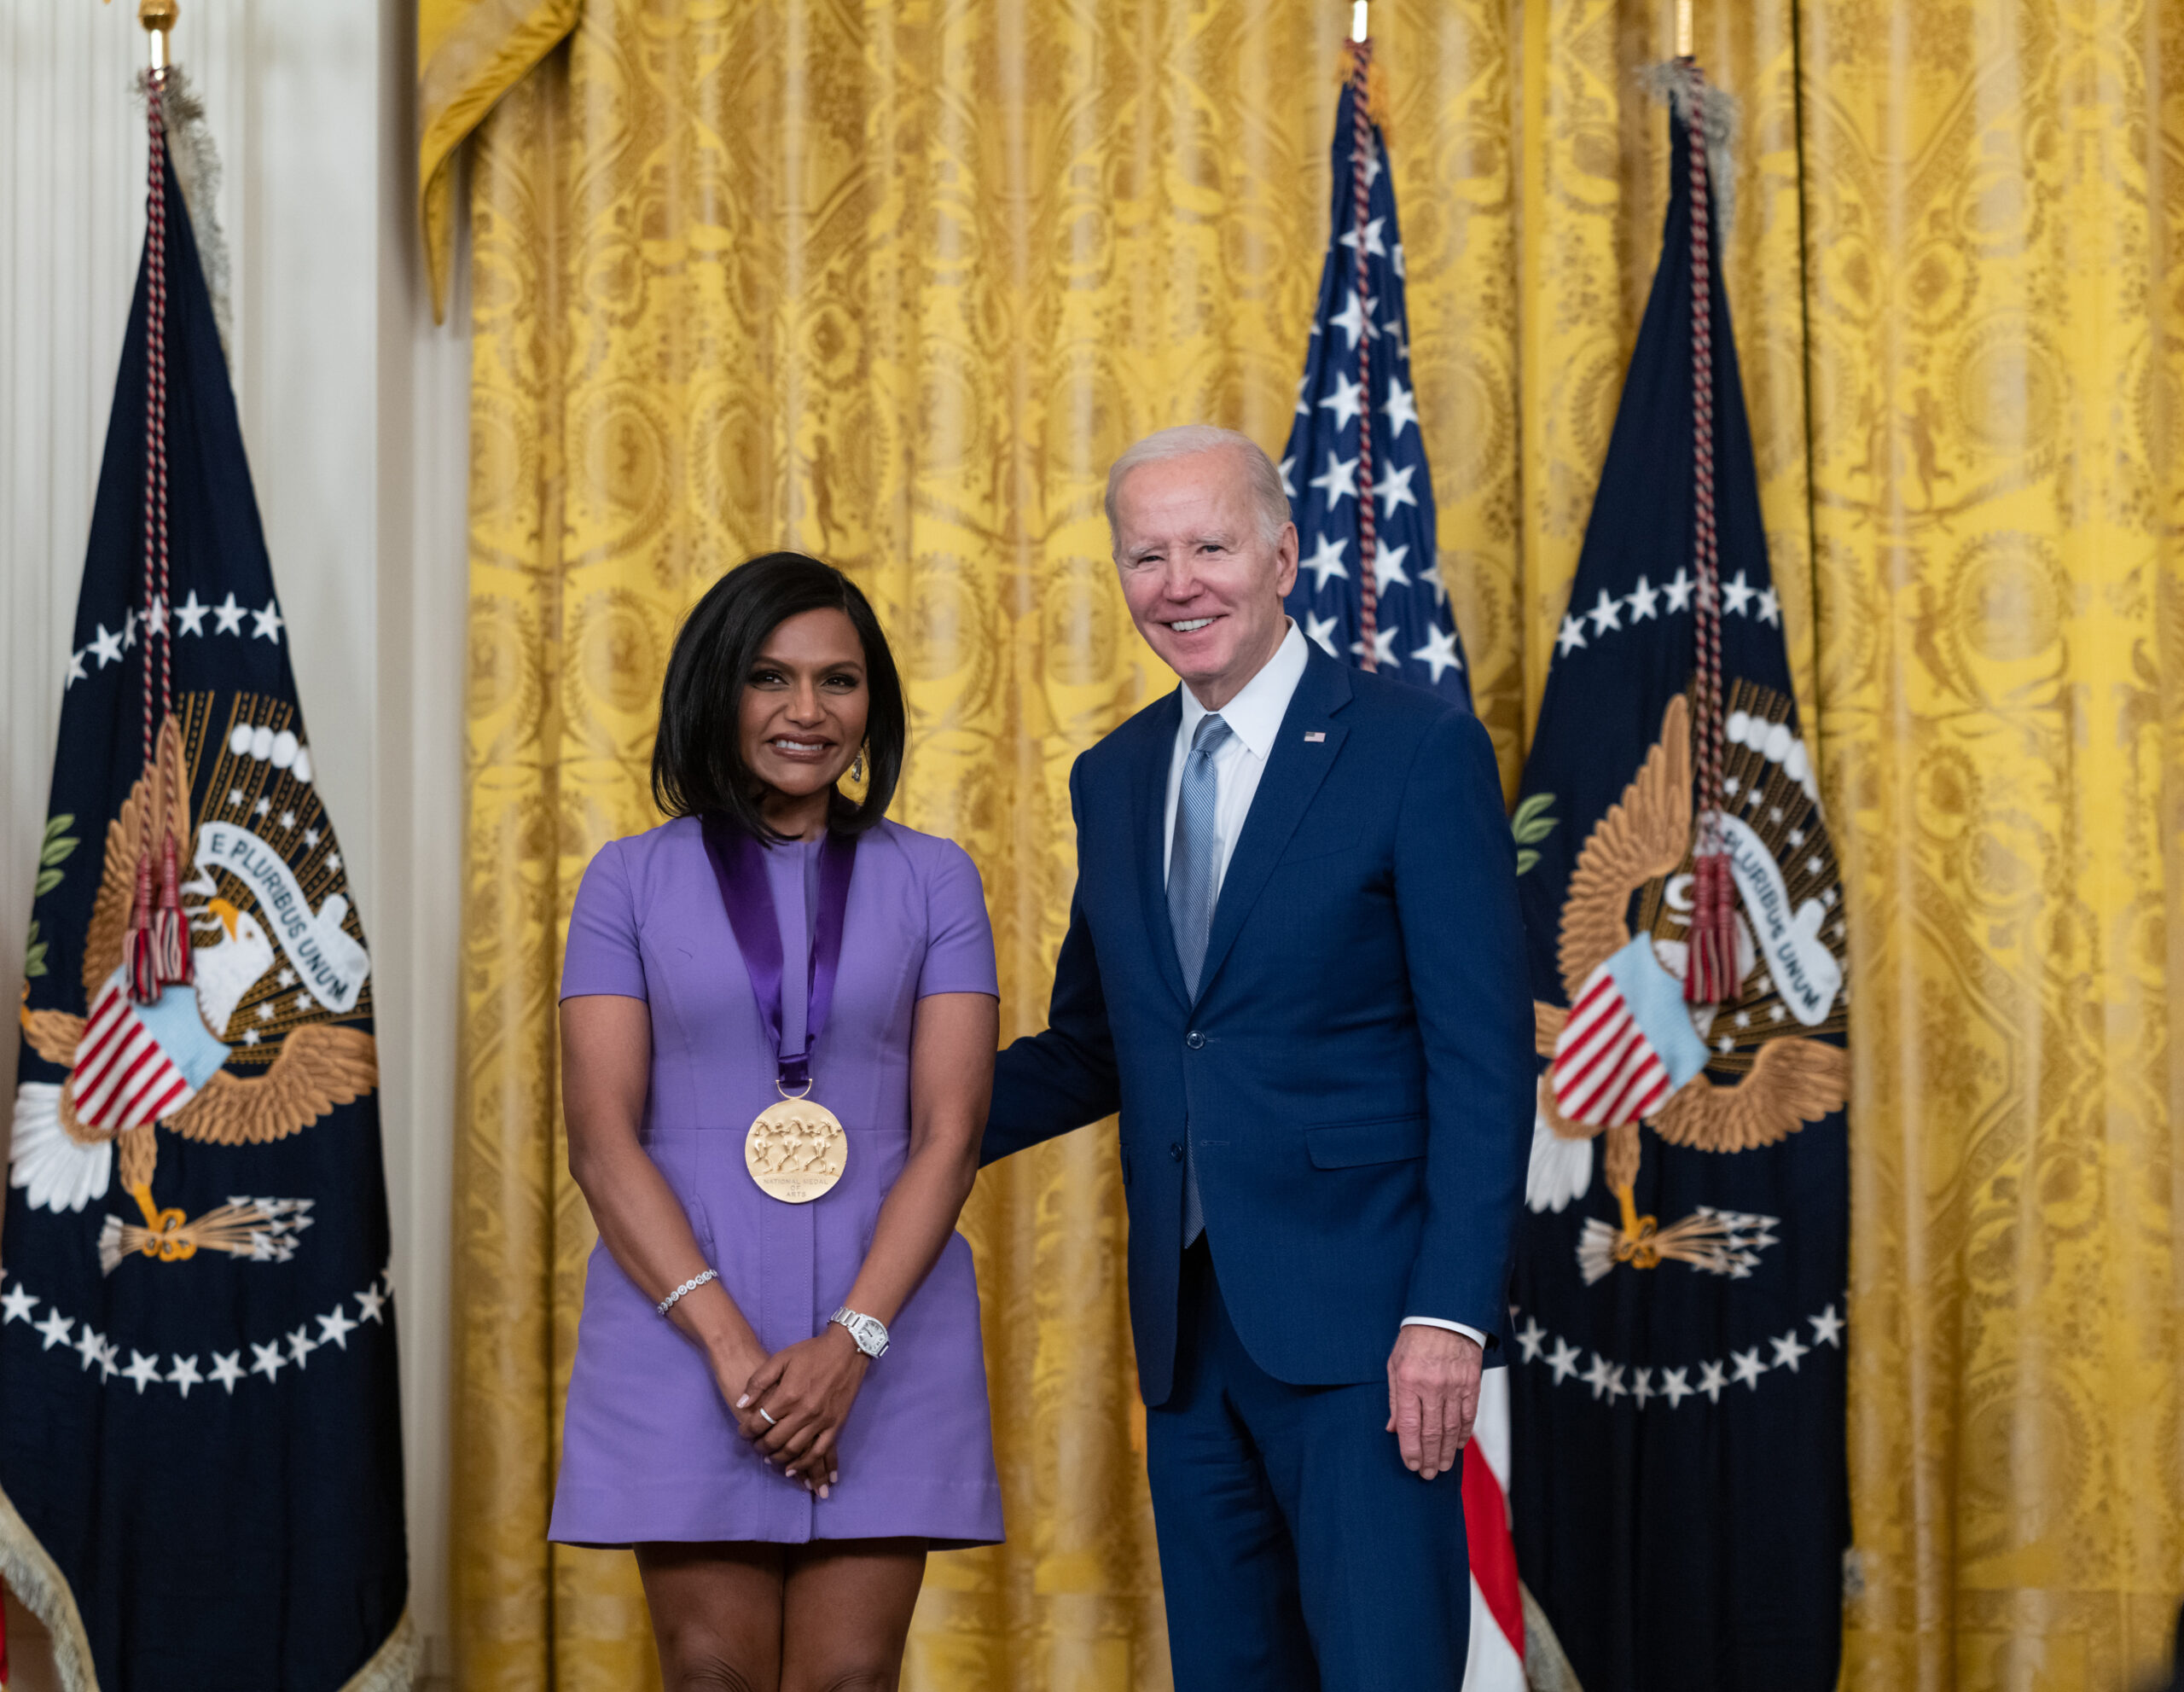 "Mindy Kaling Proud Moment: A National Medal of the Arts"